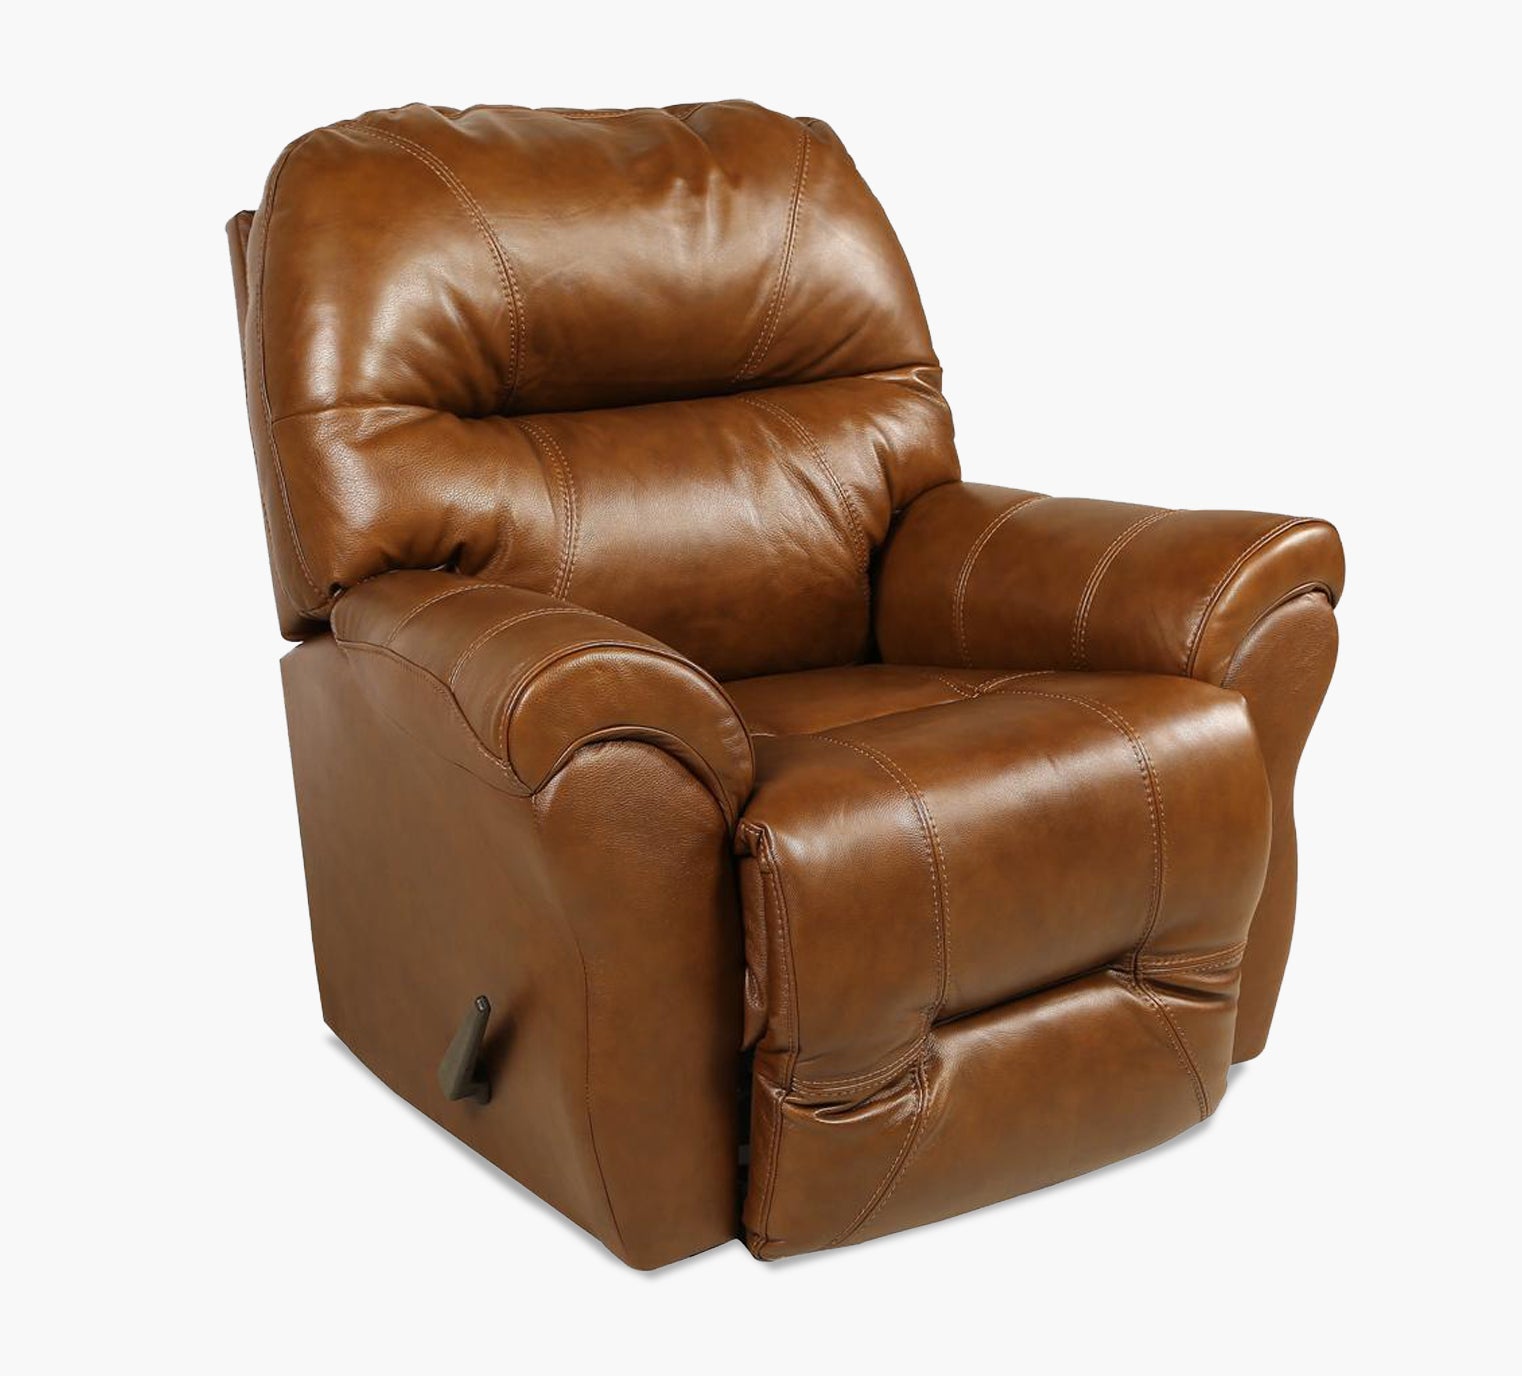 leather swivel rocking chair